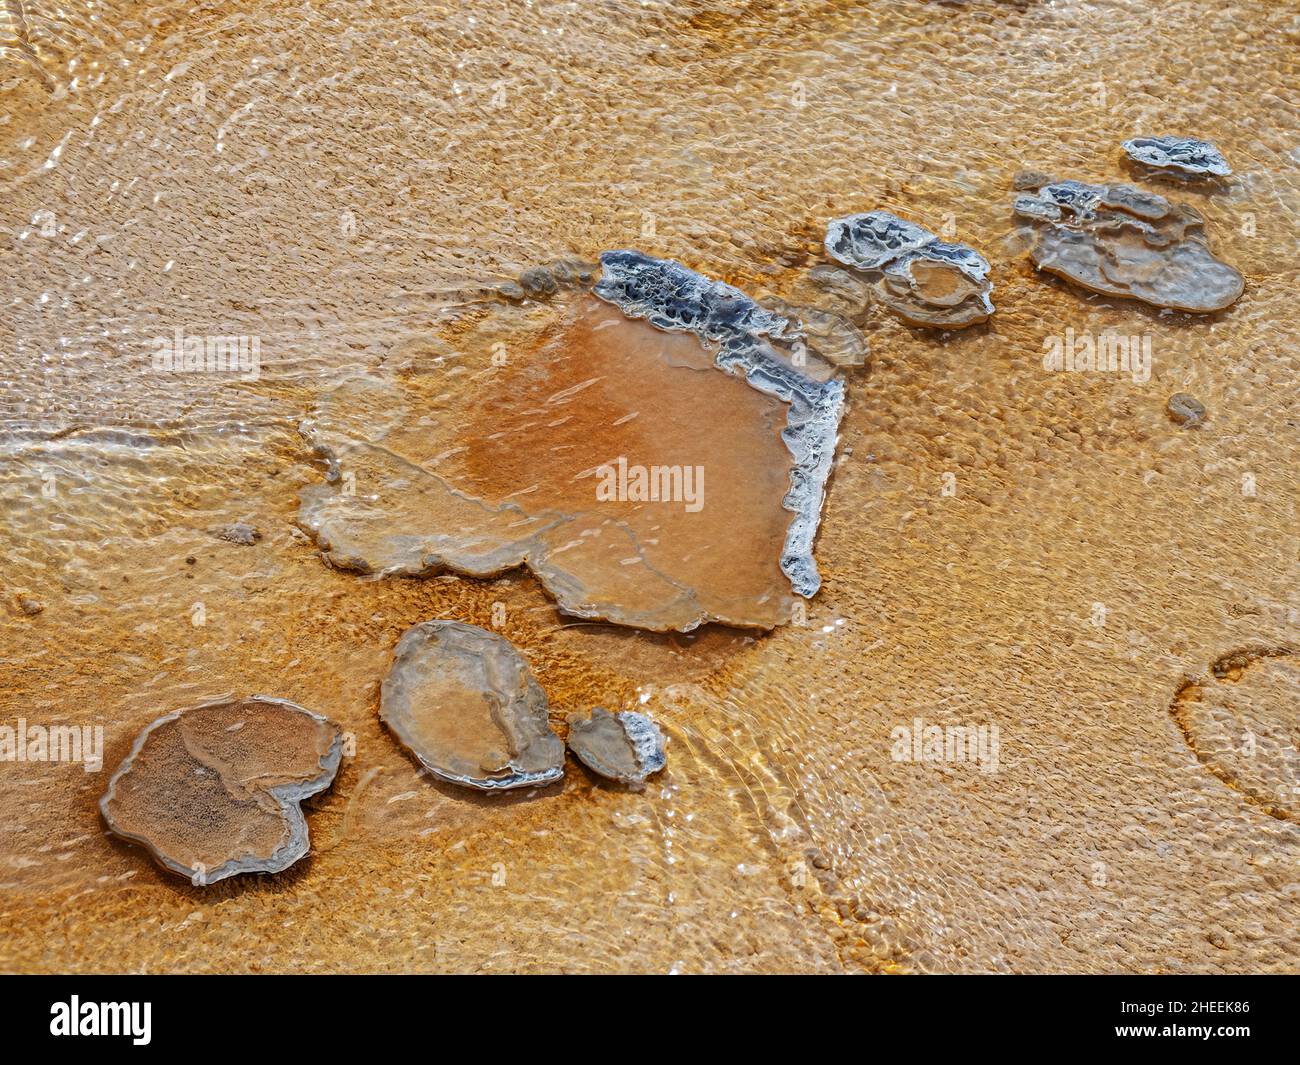 Detail of Porcelain Basin, in the Norris Geyser Basin area, Yellowstone National Park, Wyoming, USA. Stock Photo